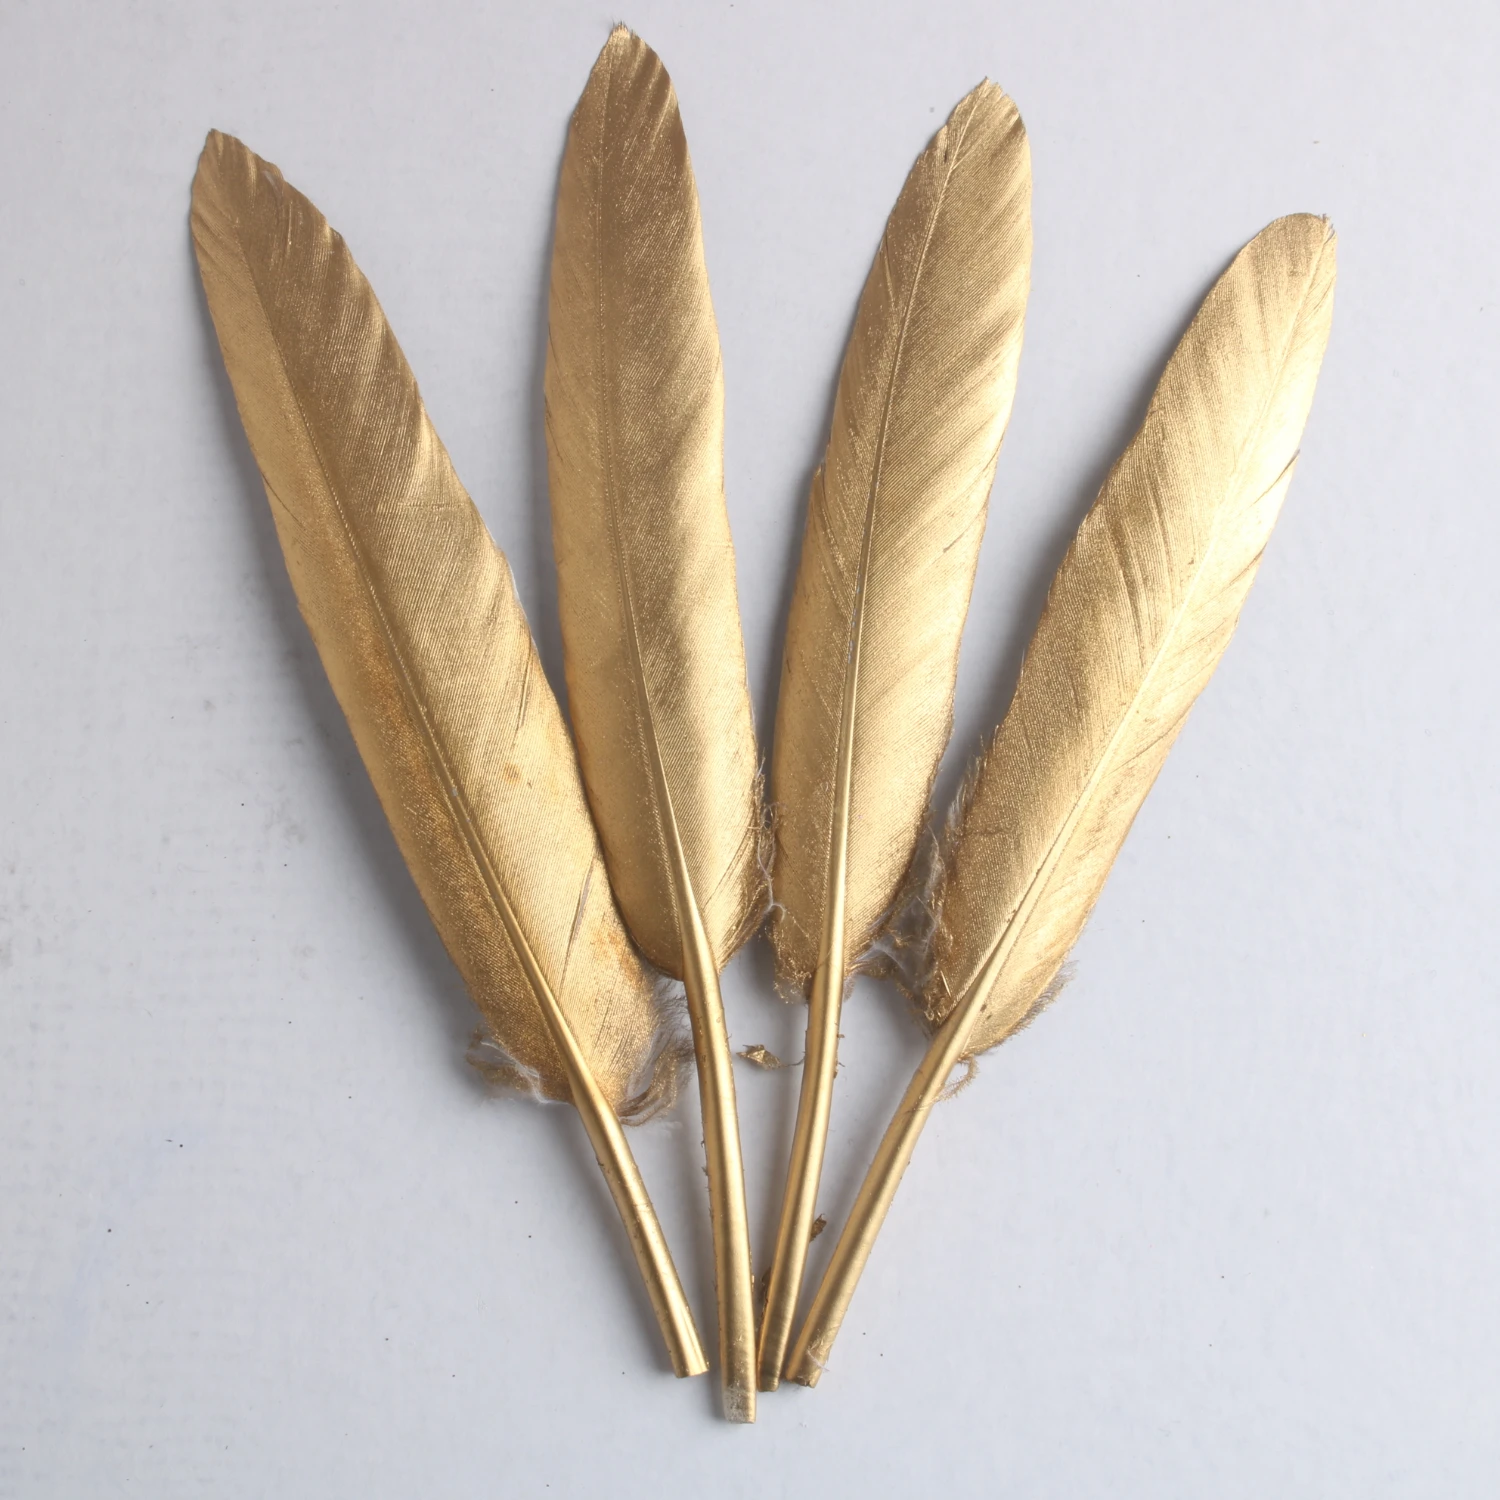 

20pcs/lot Natural Gold Goose Feathers For Crafts 10-15cm / 4-6in Feather Jewelry DIY Decoration Accessories Plume